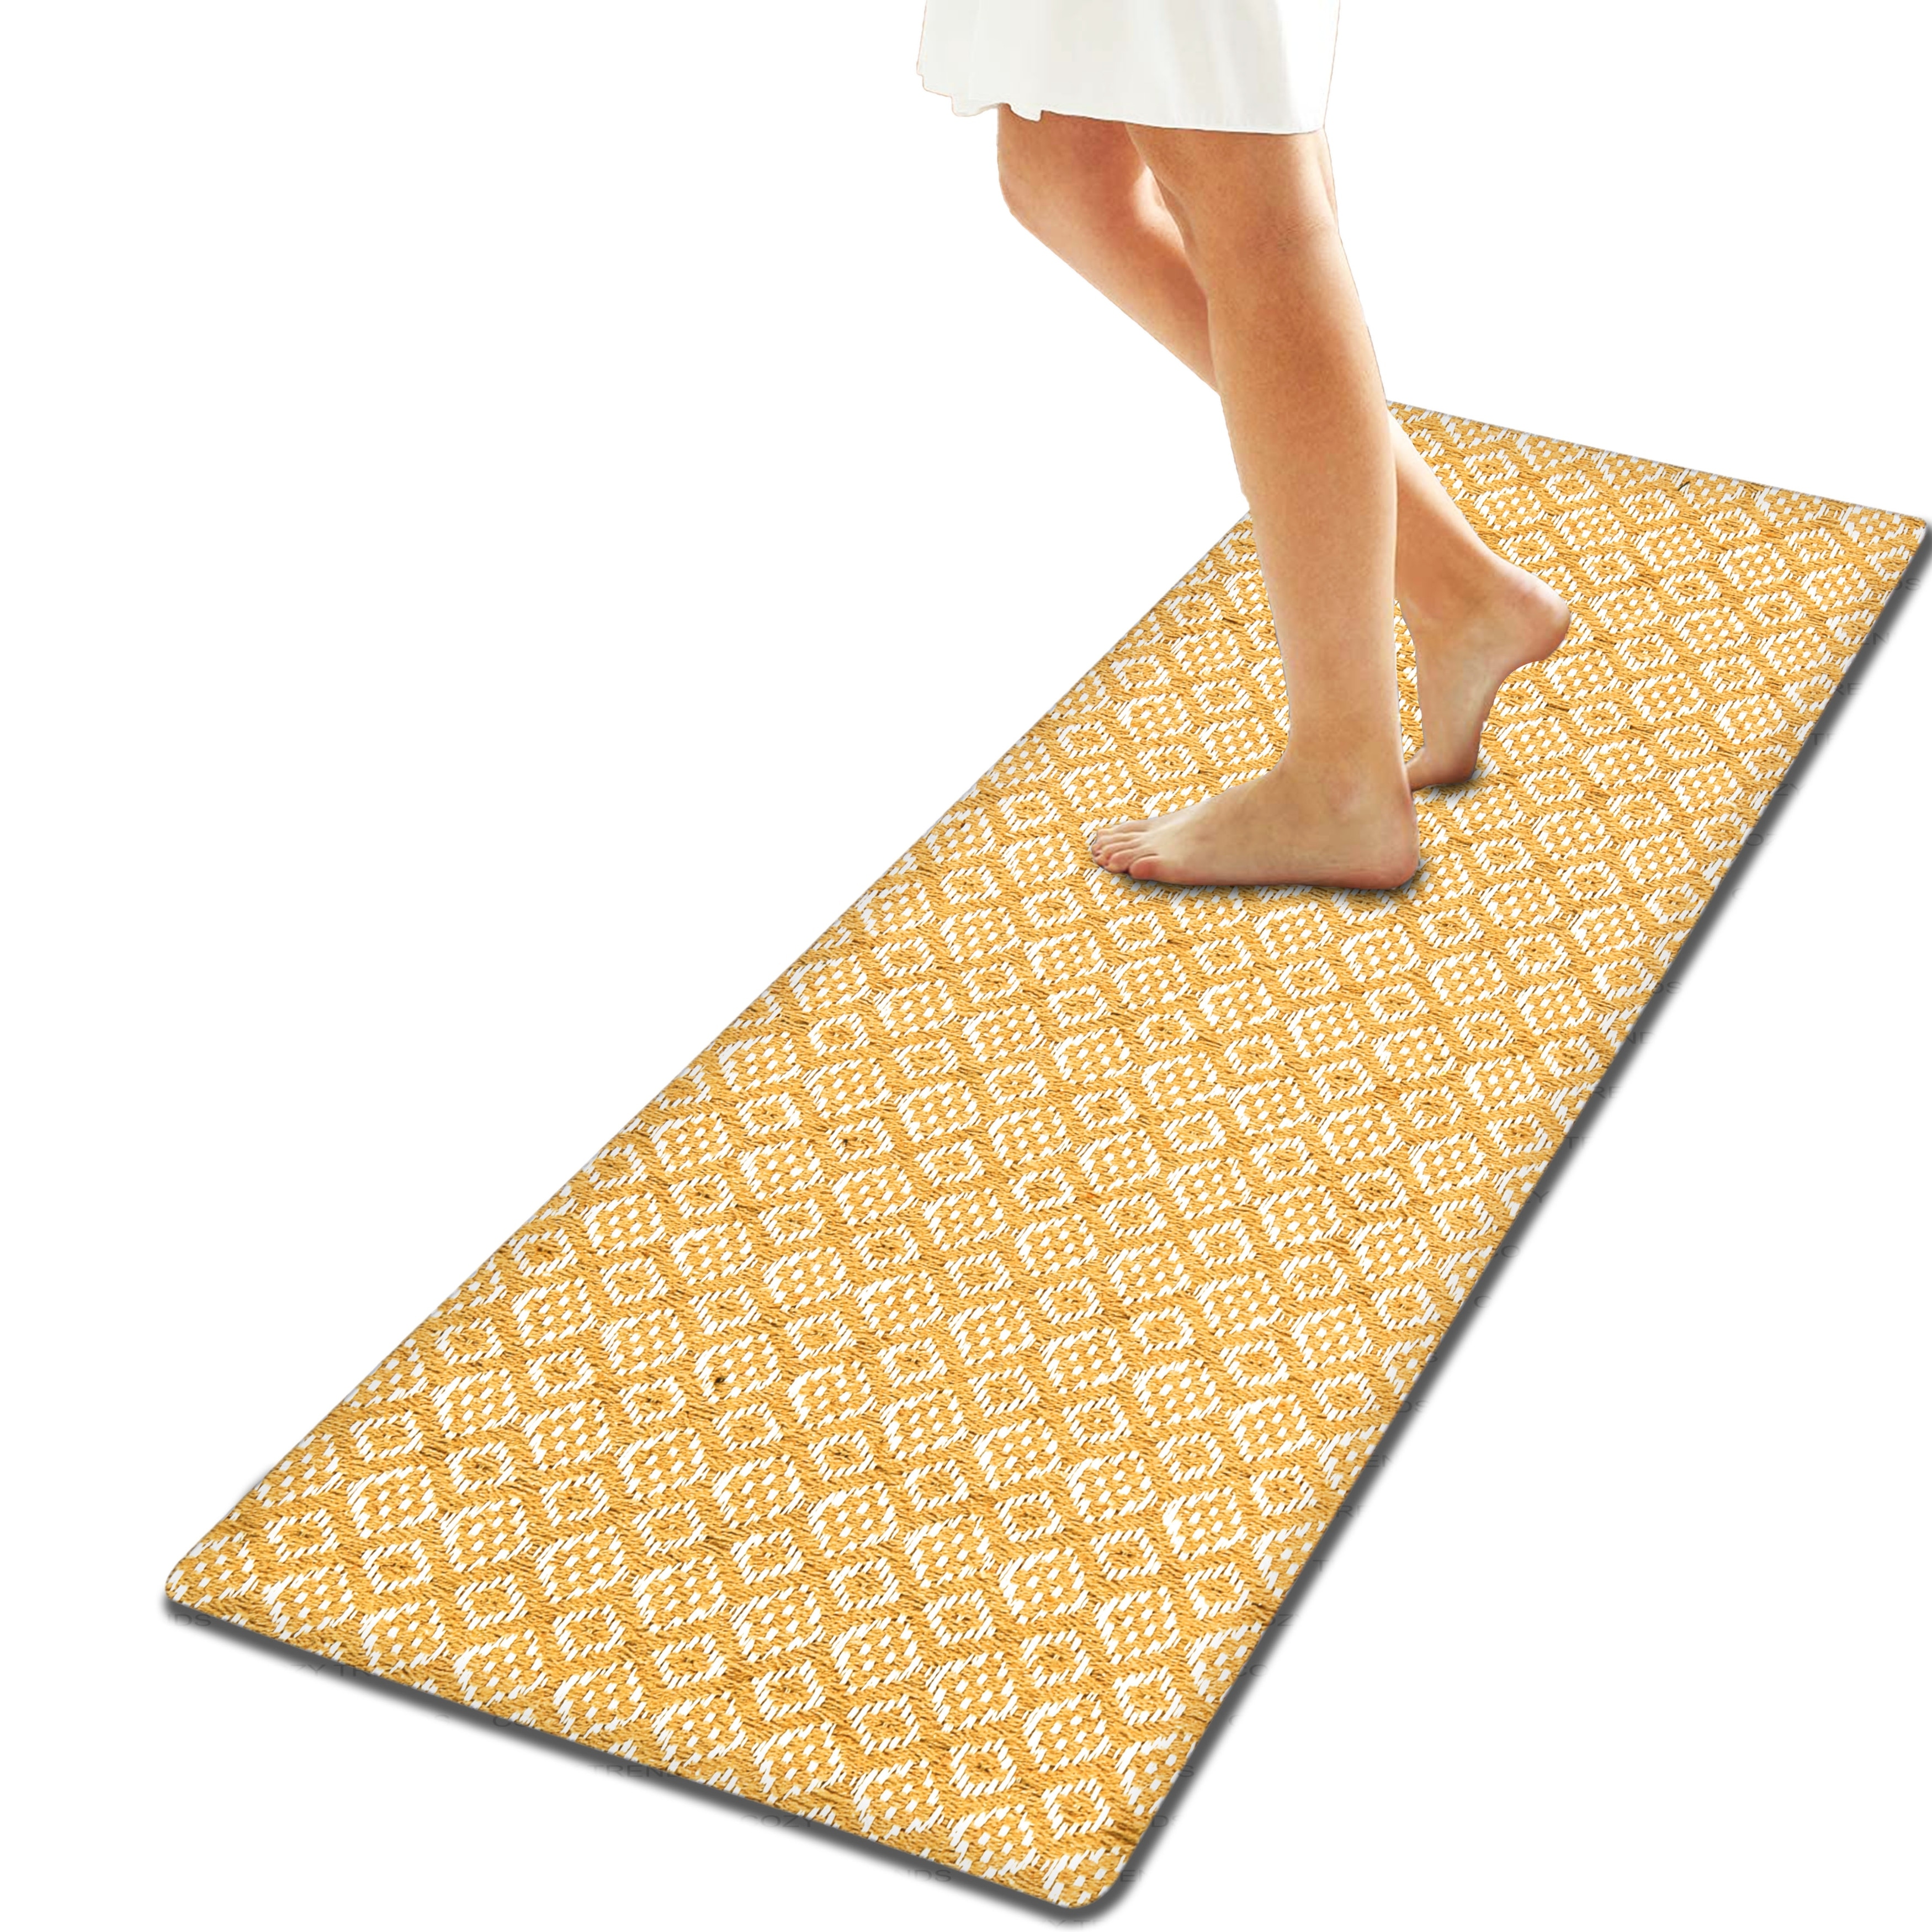 https://ak1.ostkcdn.com/images/products/is/images/direct/42e77b0310799c235953d2f2ef1ff21643e81652/Kitchen-Runner-Rug--Mat-Cushioned-Cotton-Hand-Woven-Anti-Fatigue-Mat-Kitchen-Bathroom-Bed-side-18x48%27%27.jpg